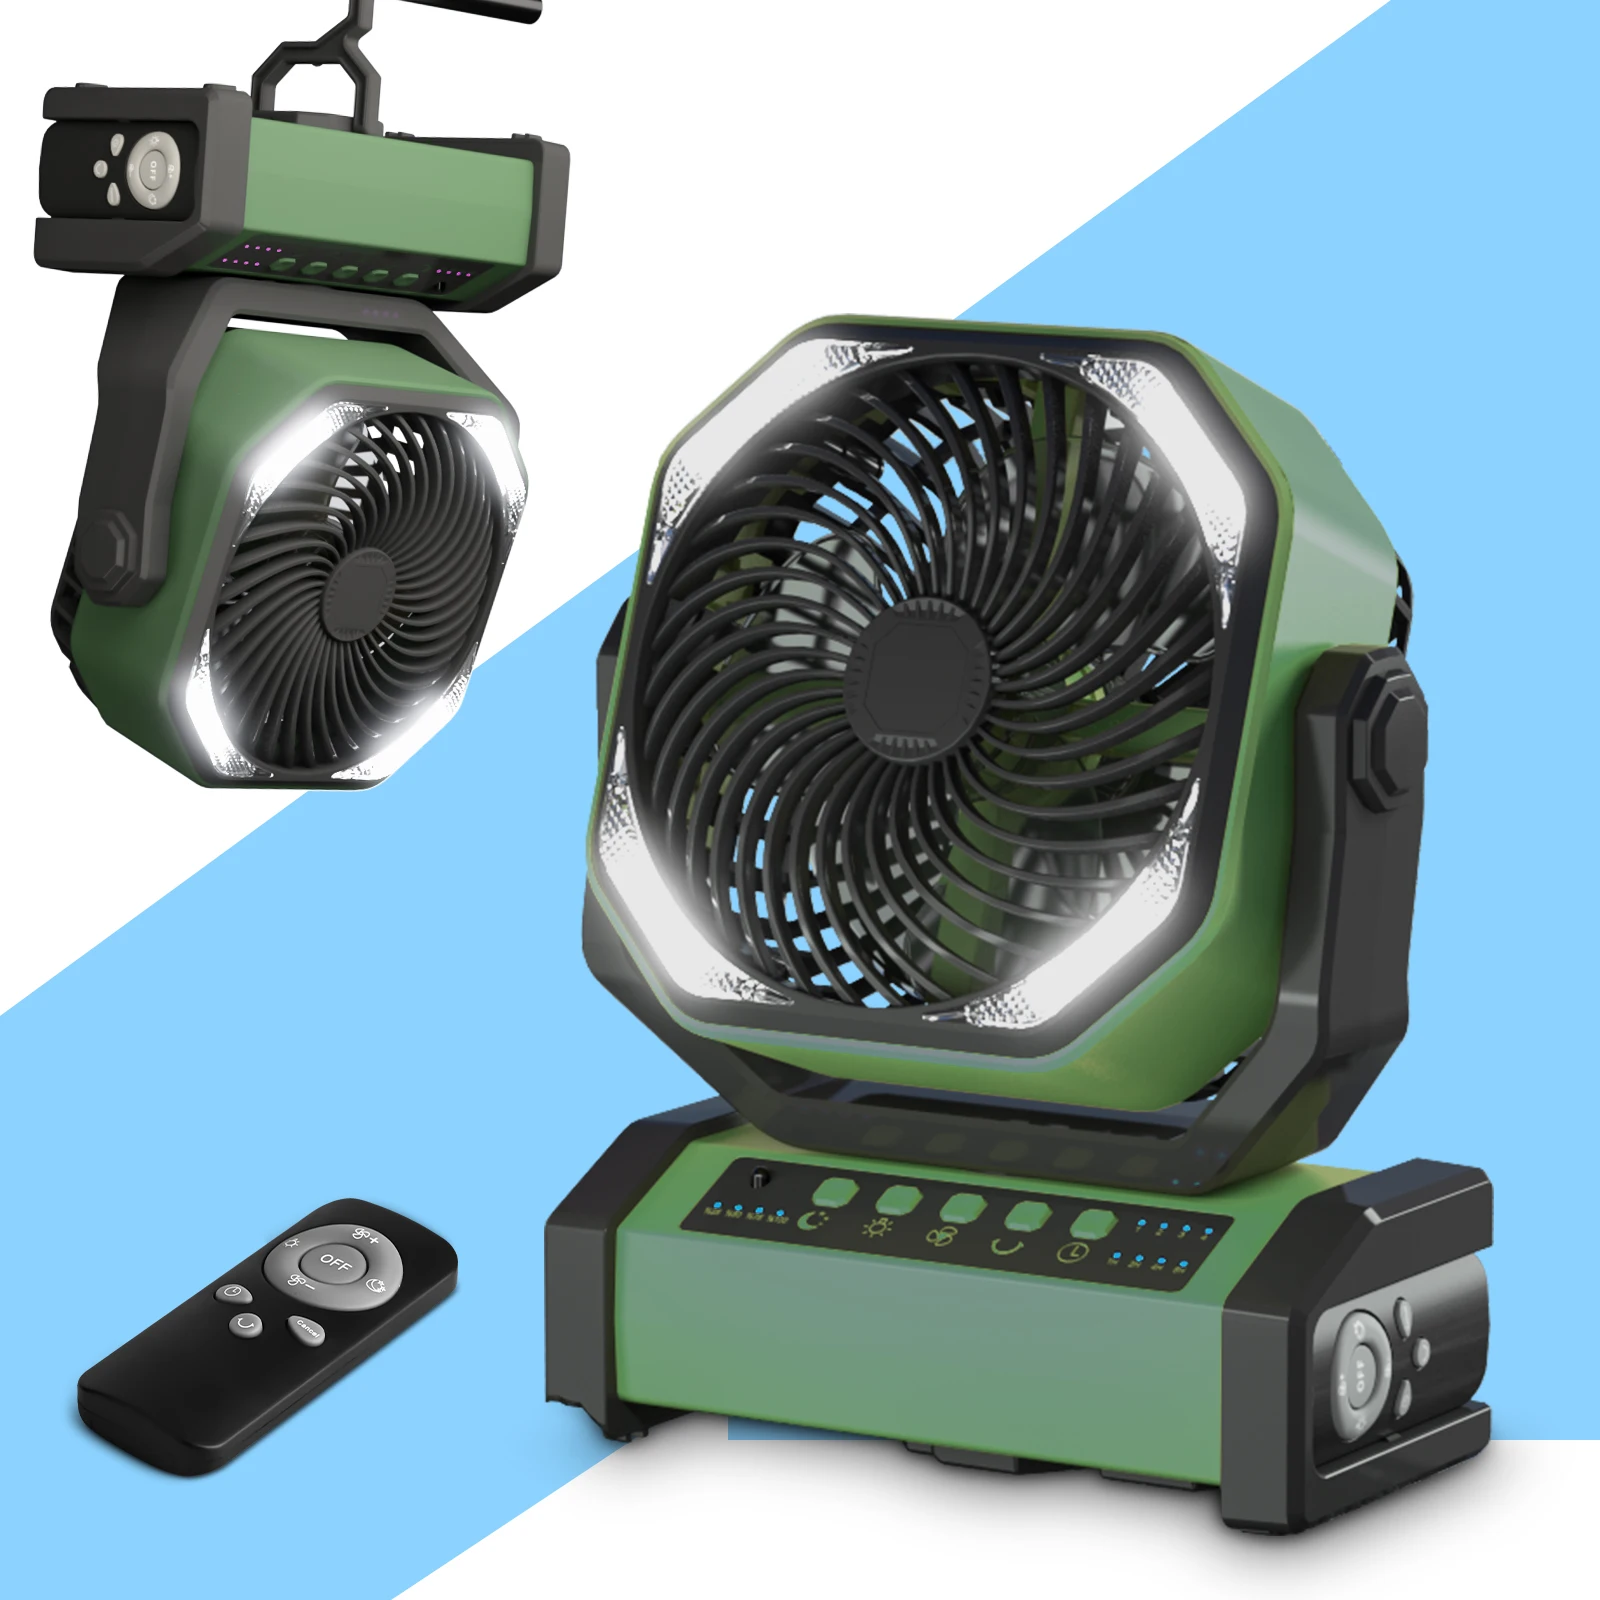 

20000mAh D12 Green Camping LED Fan with Light,Rechargeable Battery Powered Outdoor Tent Fan with Light